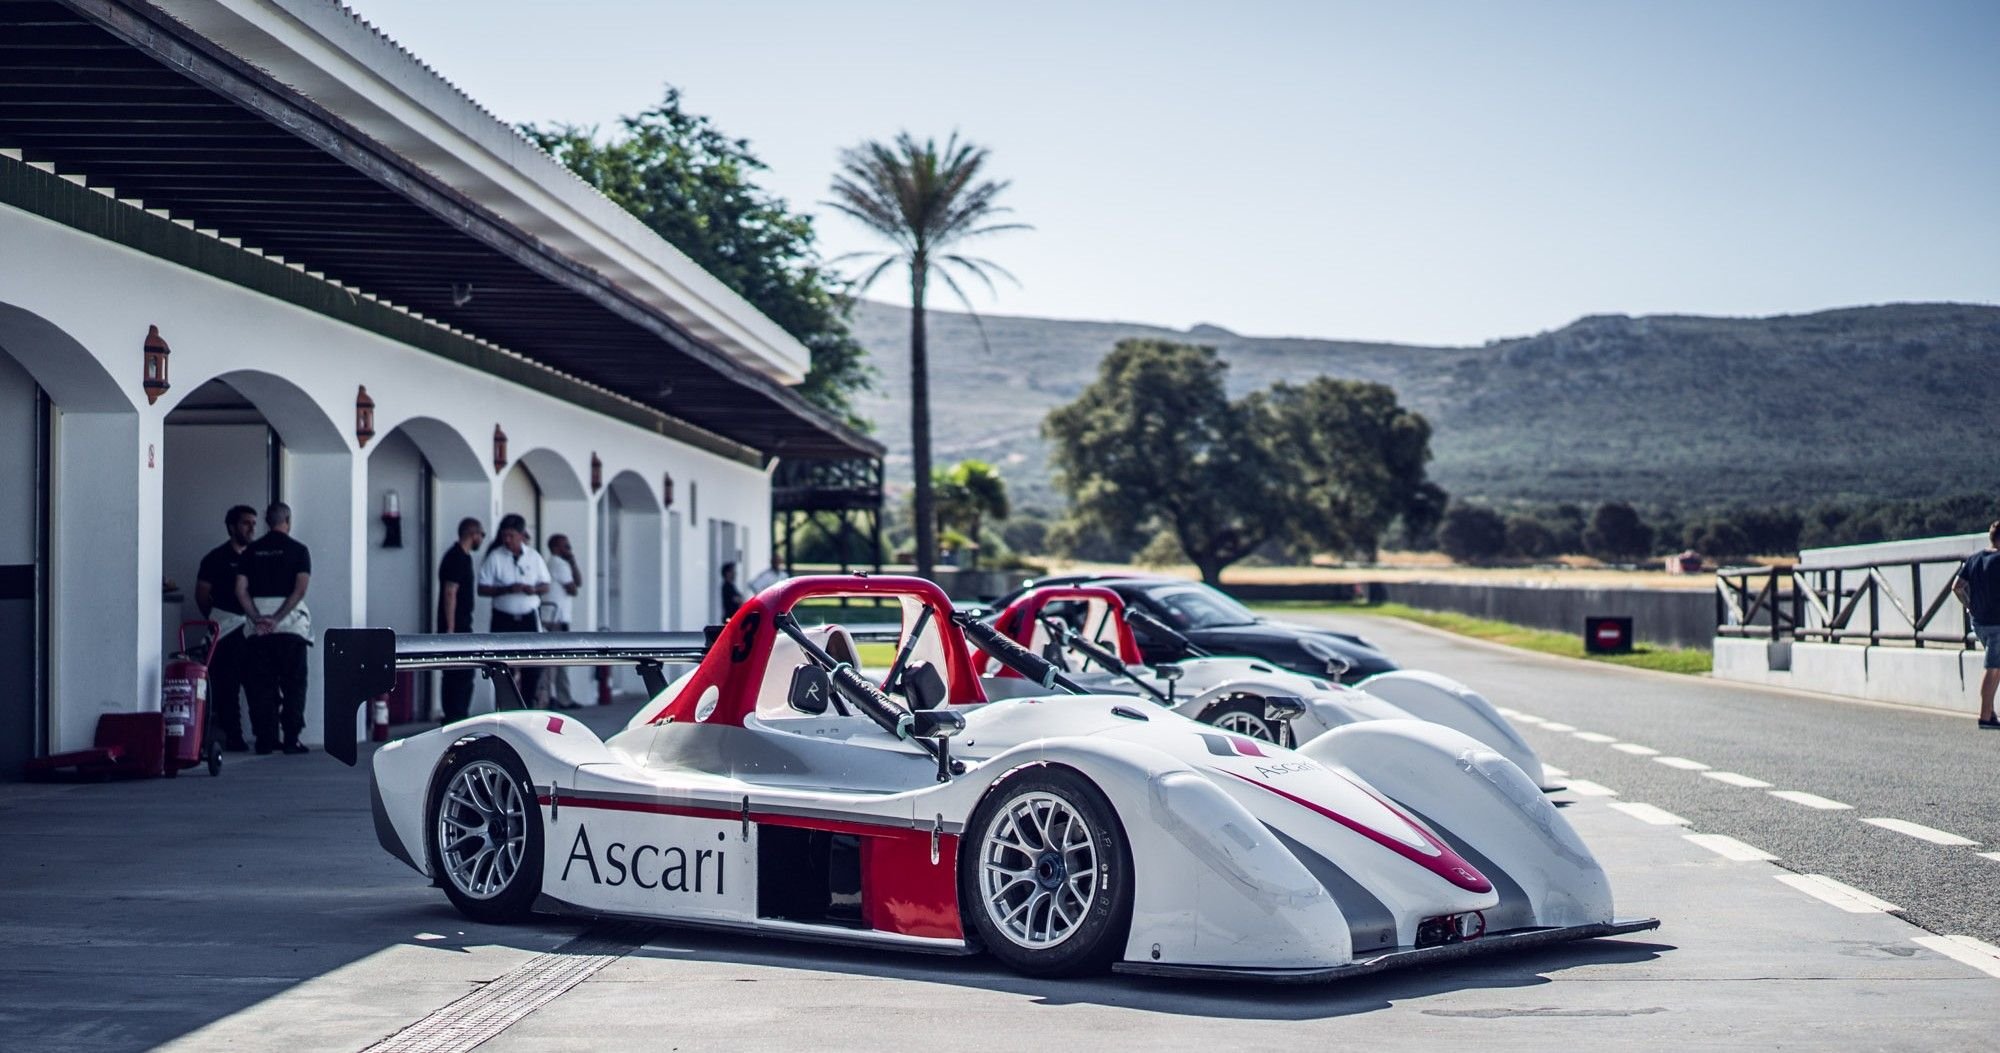 The Ascari Racetrack Resort Is Every Petrolhead's Dream Vacation